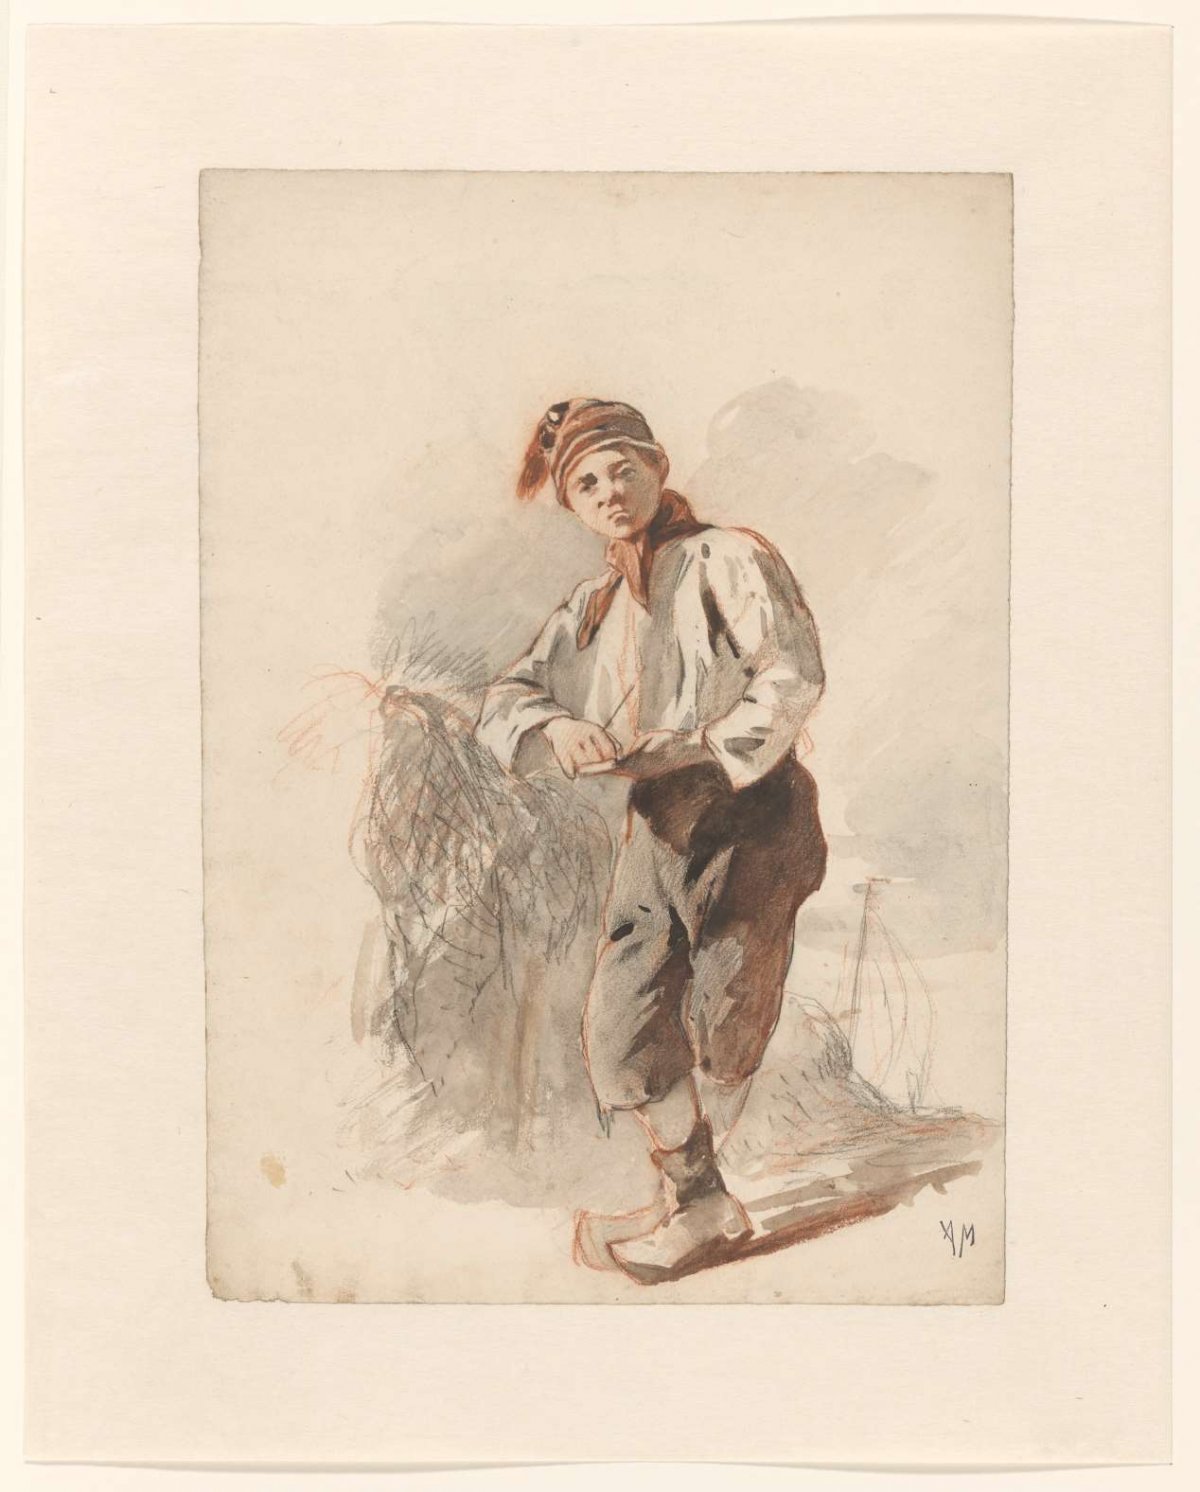 Standing fisher boy with hat, Anton Mauve, 1848 - 1888